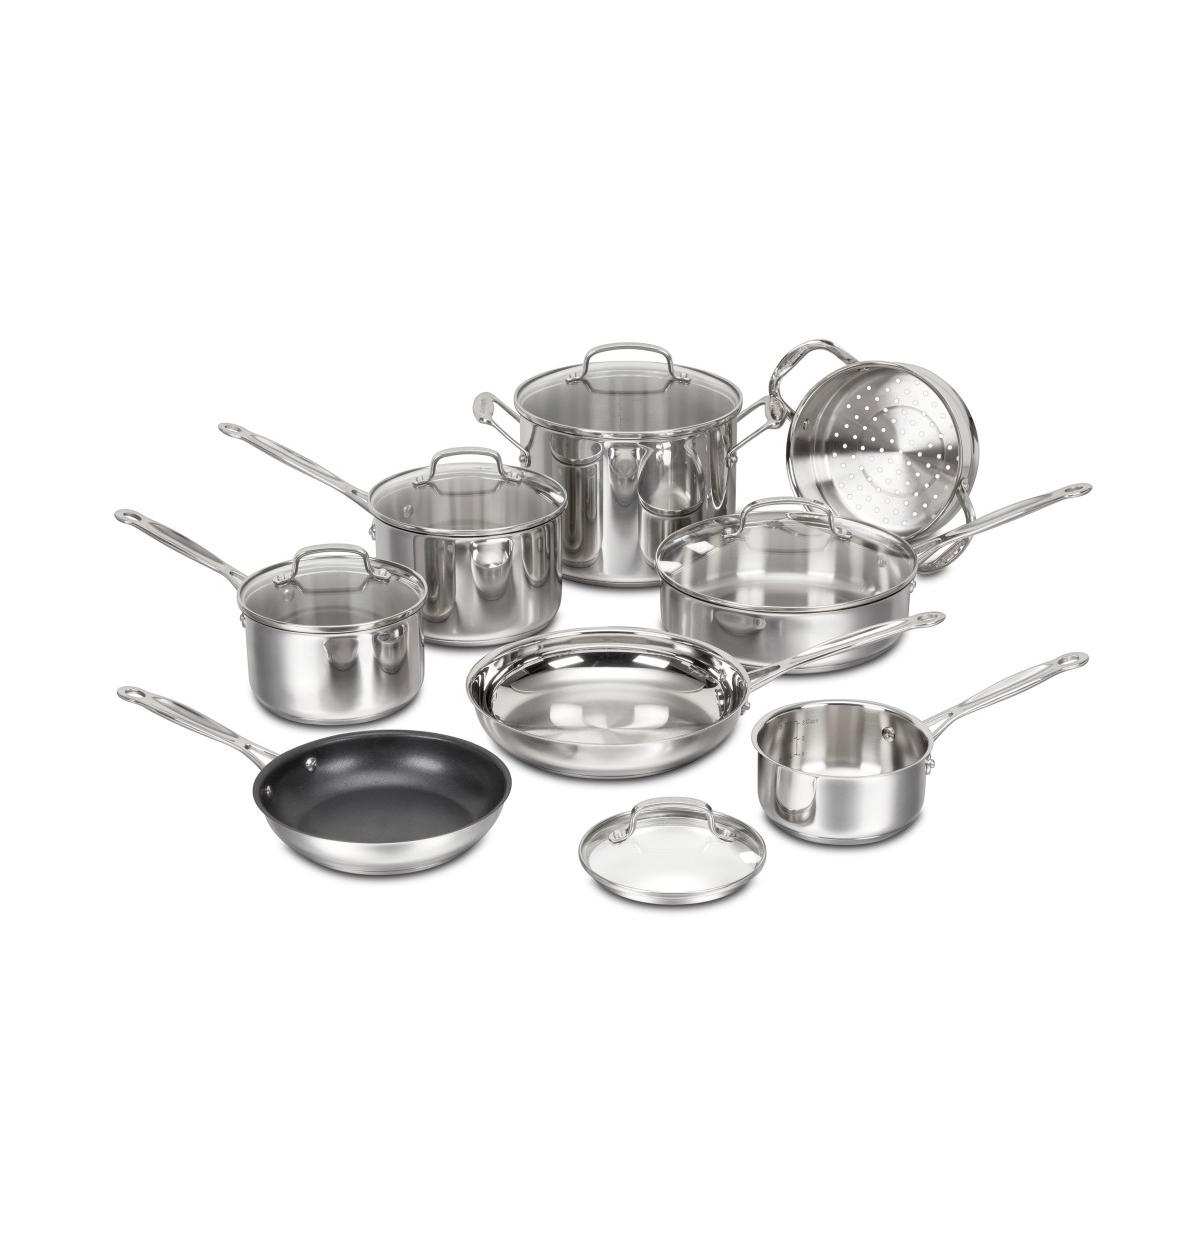 Cuisinart Chef's Classic Stainless Steel 13 Piece Cookware Set